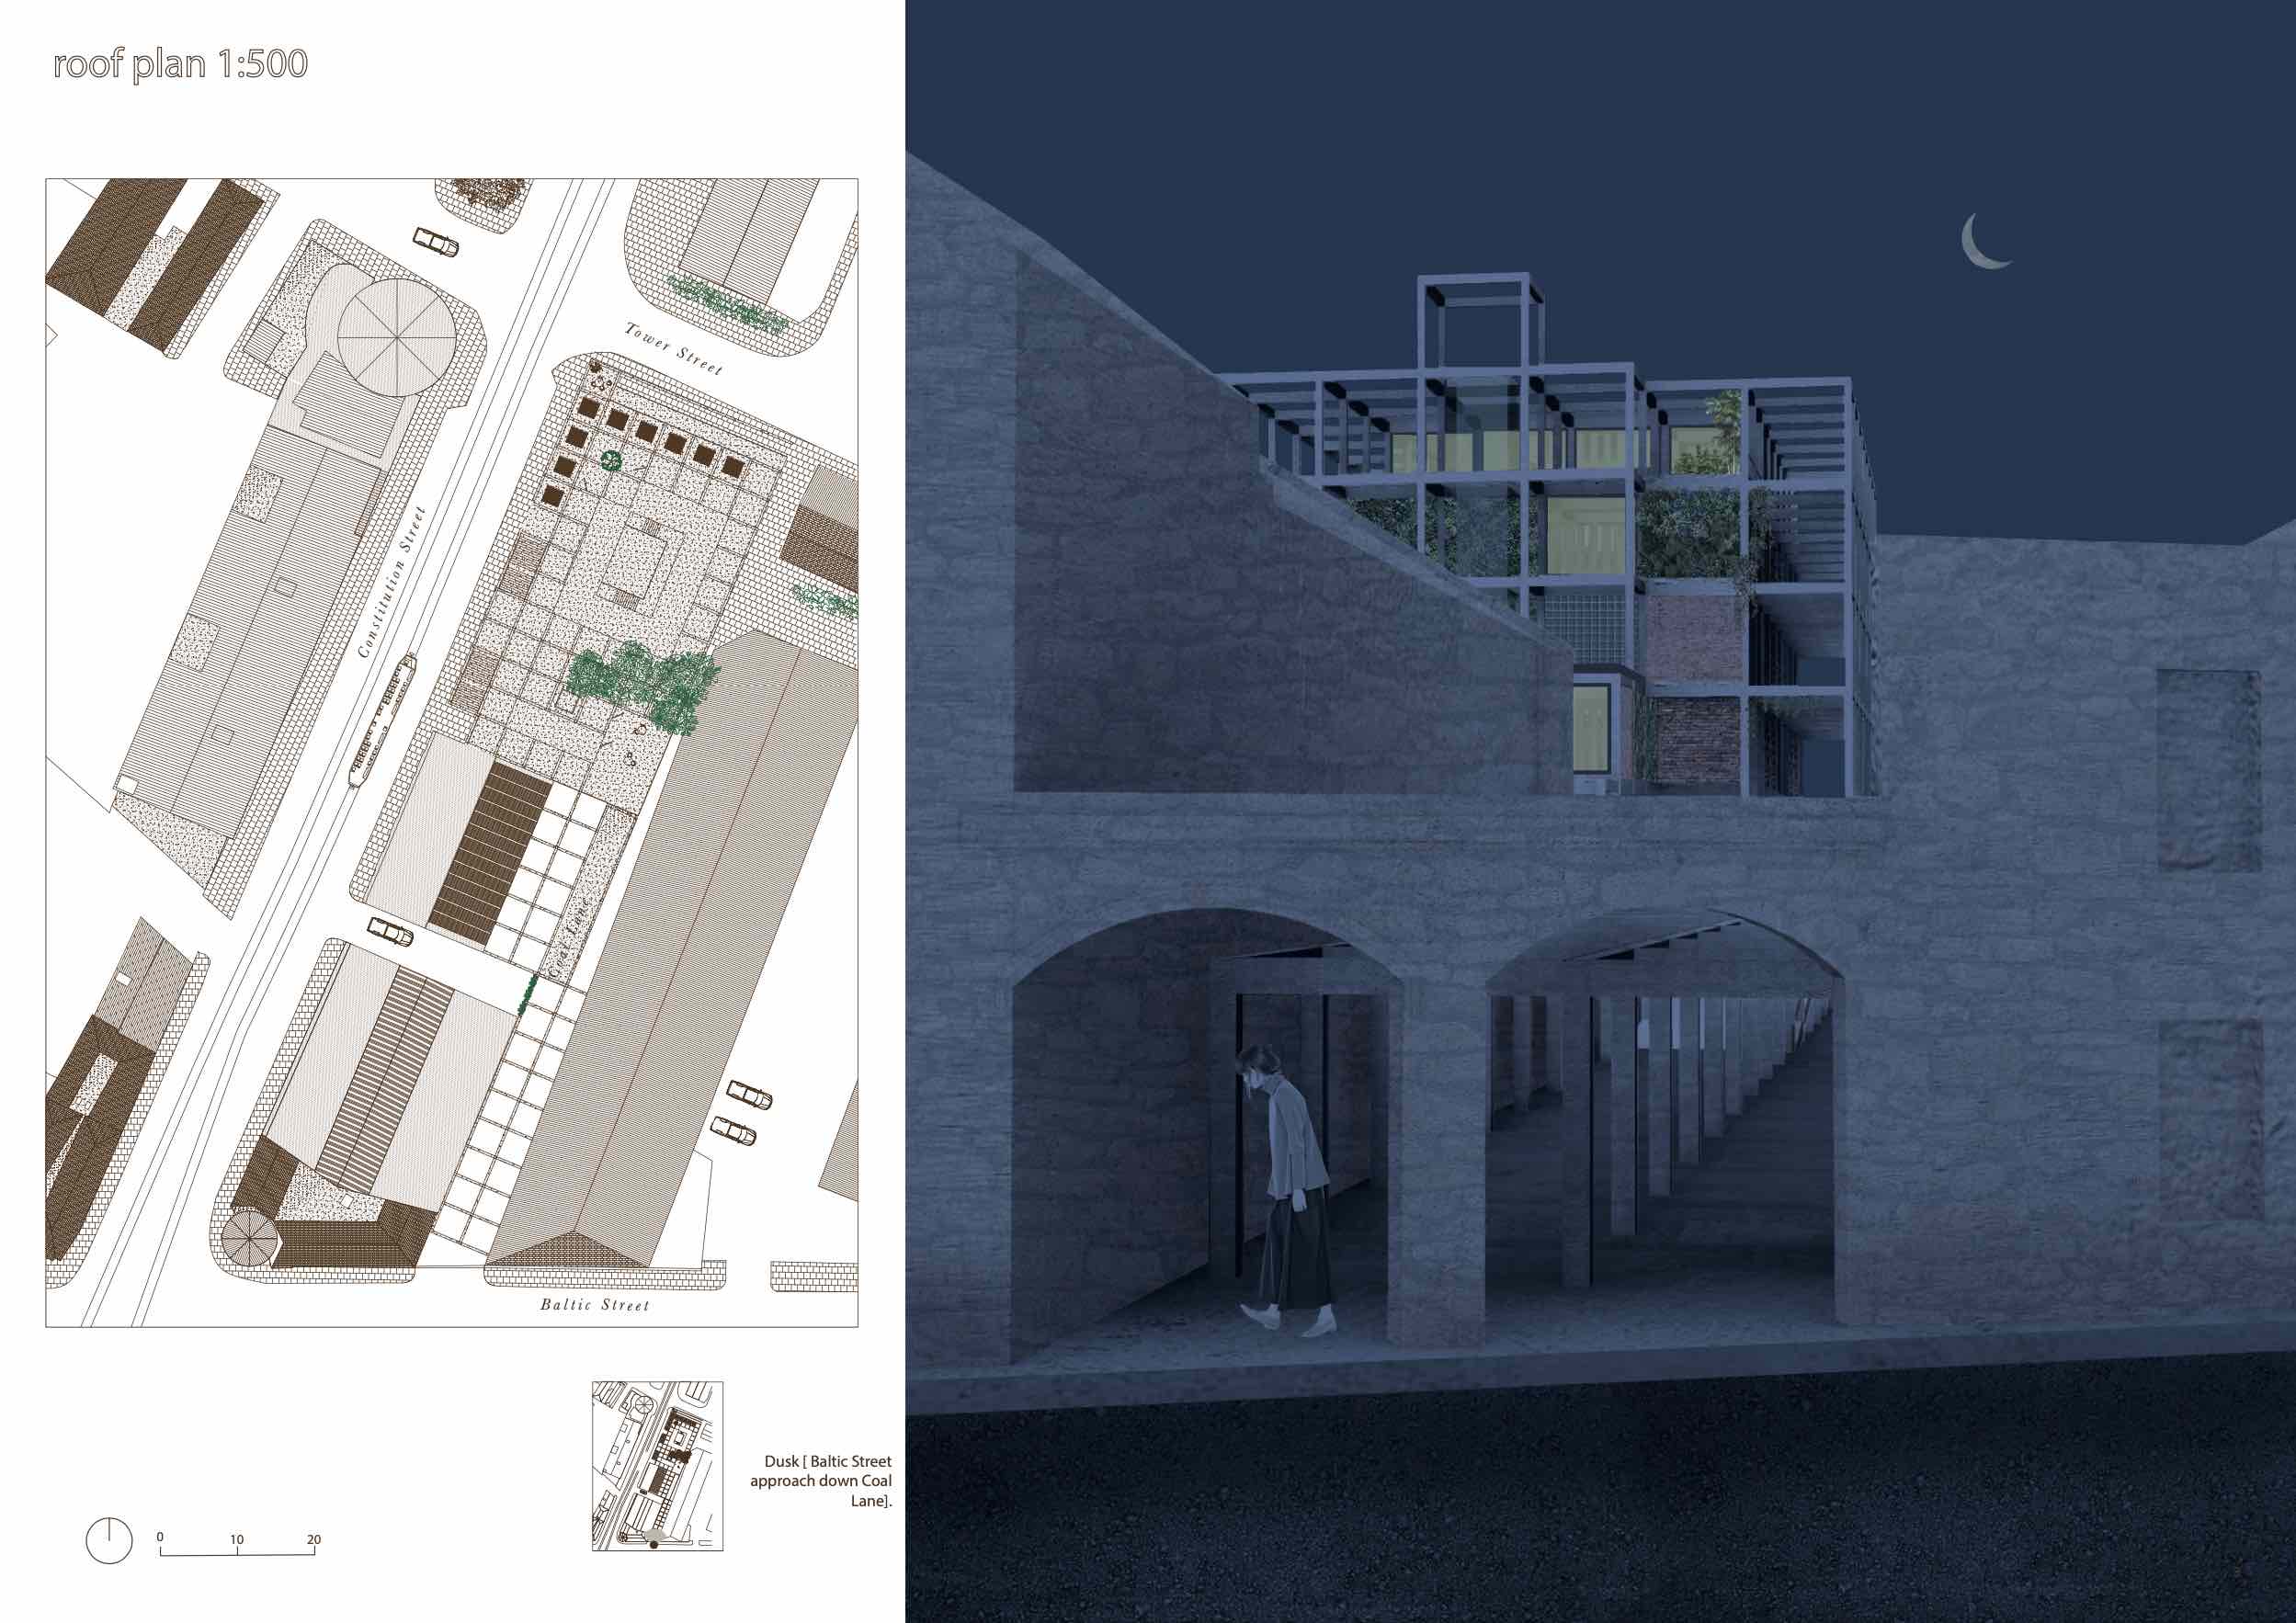 Roof plan and Coal Lane entrance